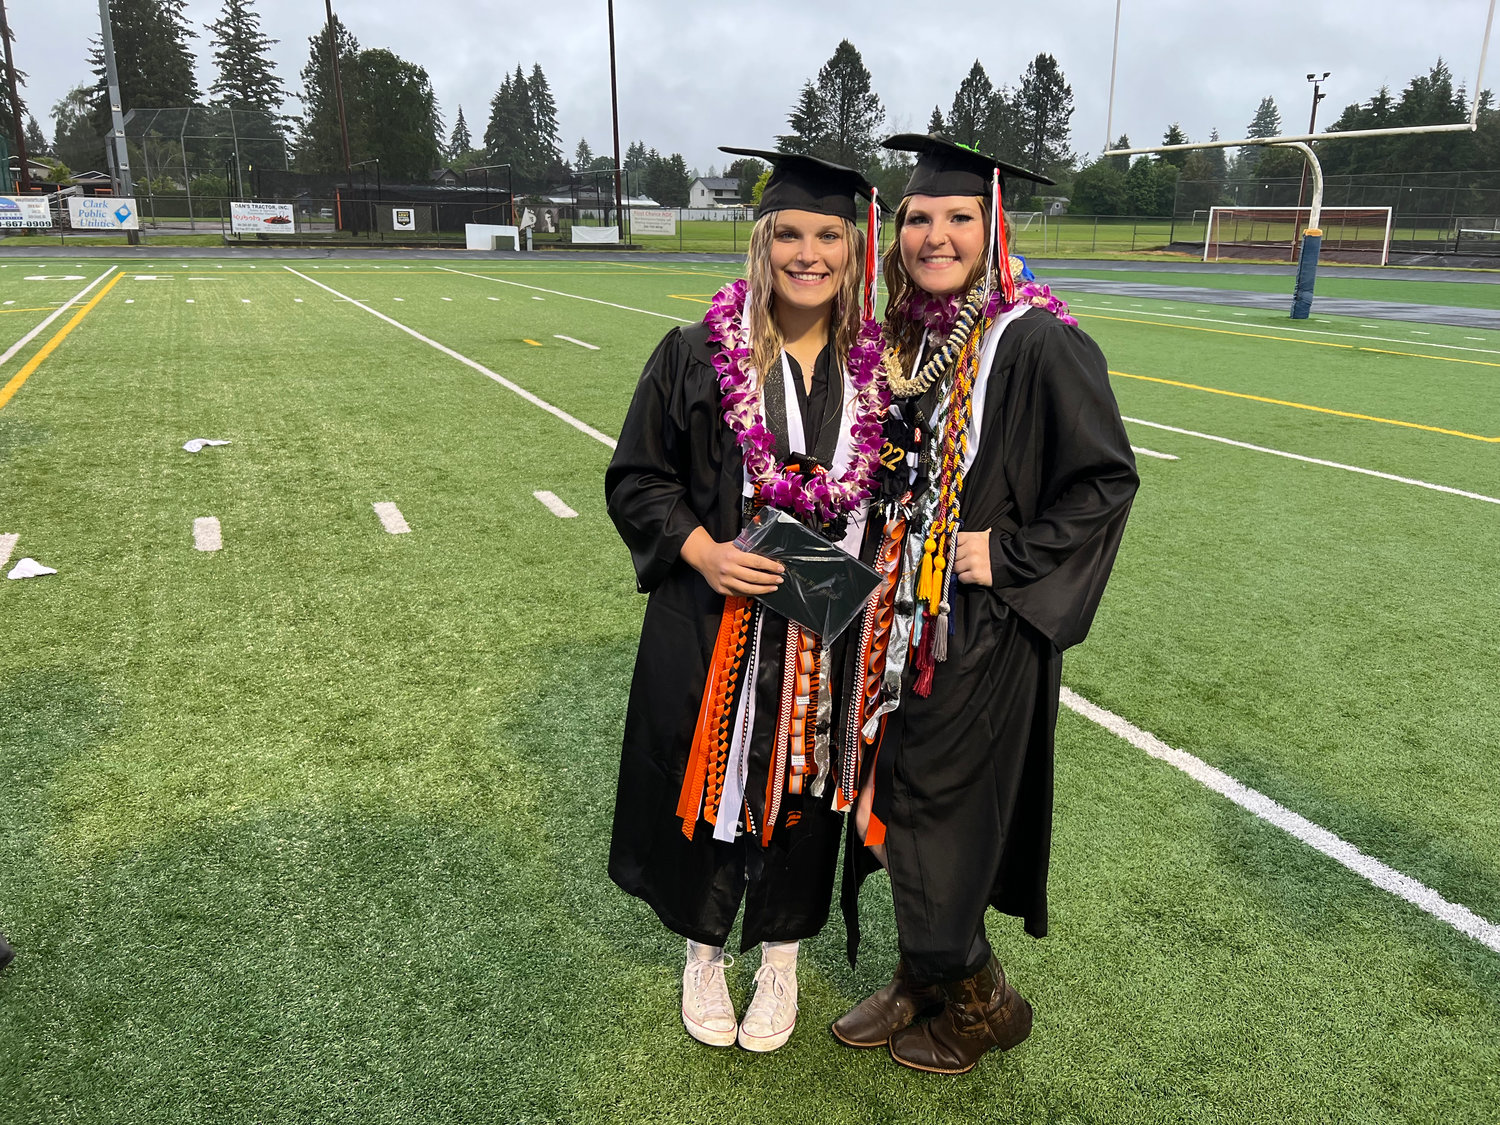 Cady and Liv Gruenberg are pictured after graduating from Battle Ground High School on June 10.